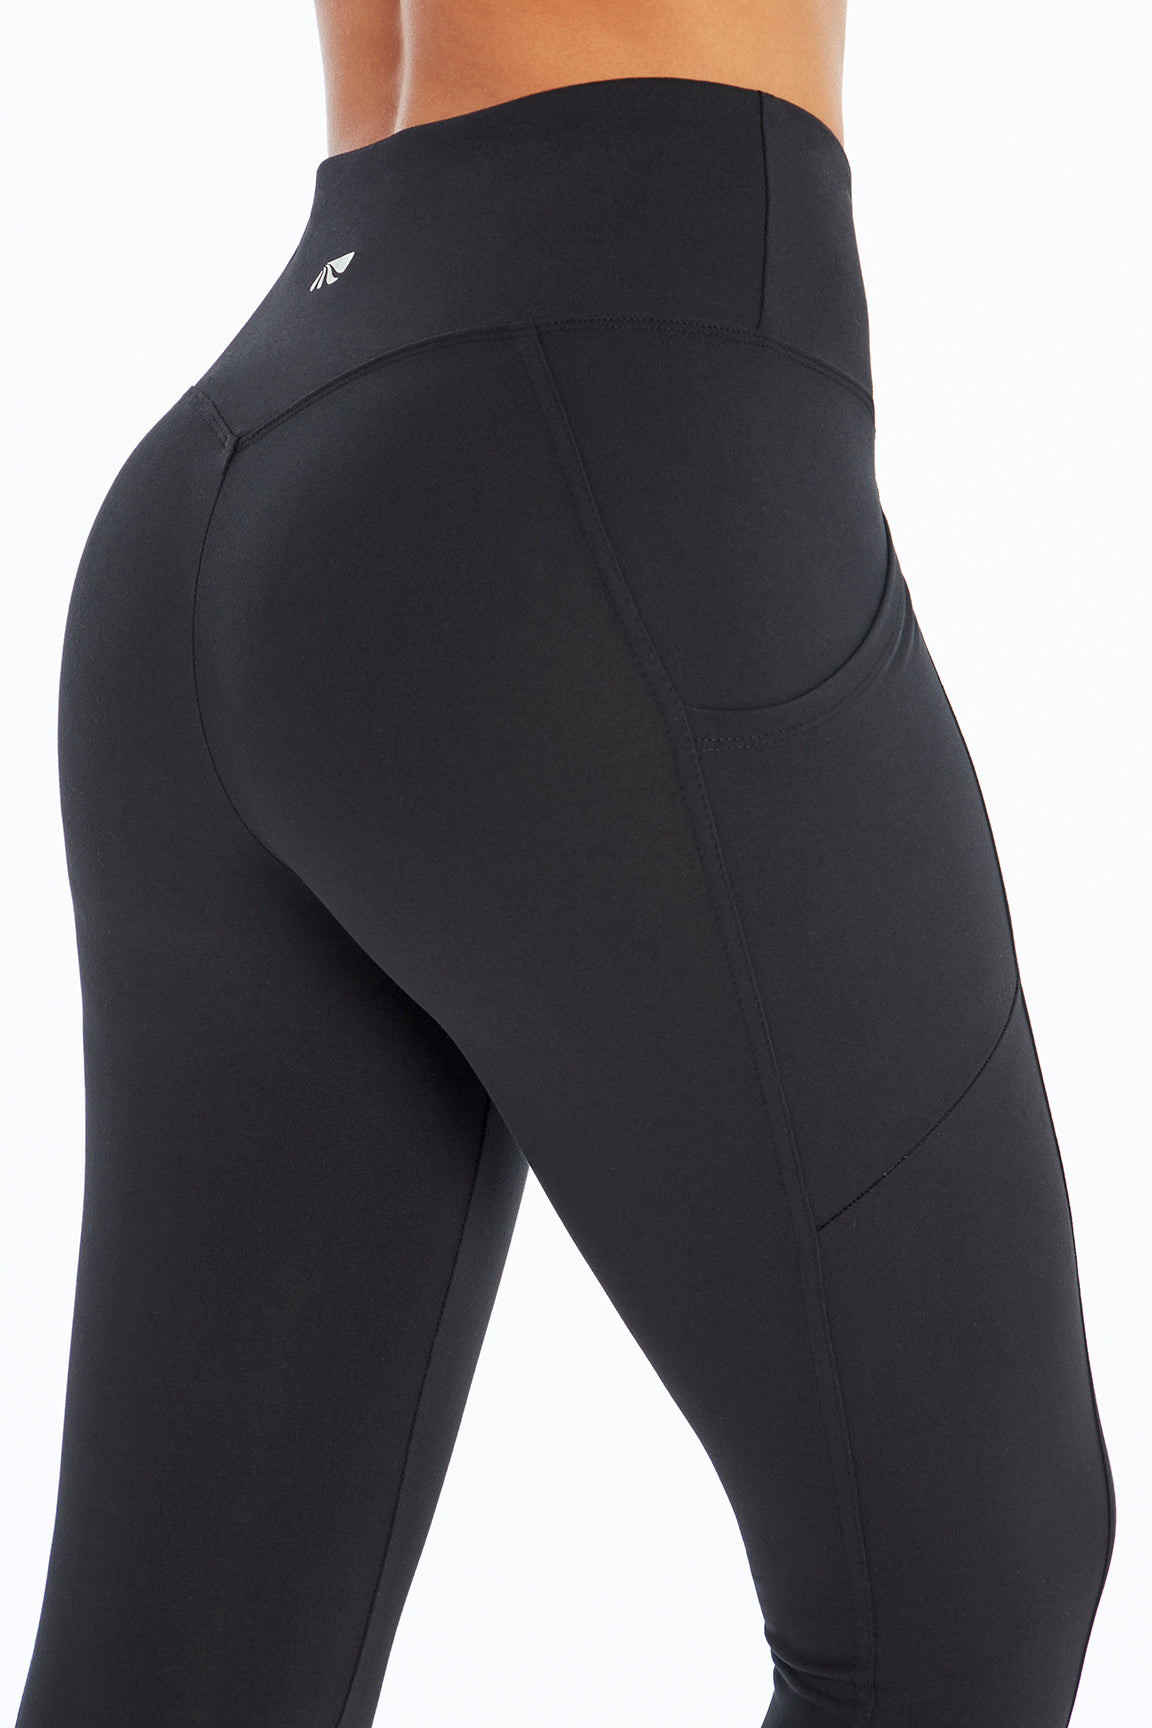 Black Leggings With Side Pocket · Filly Flair